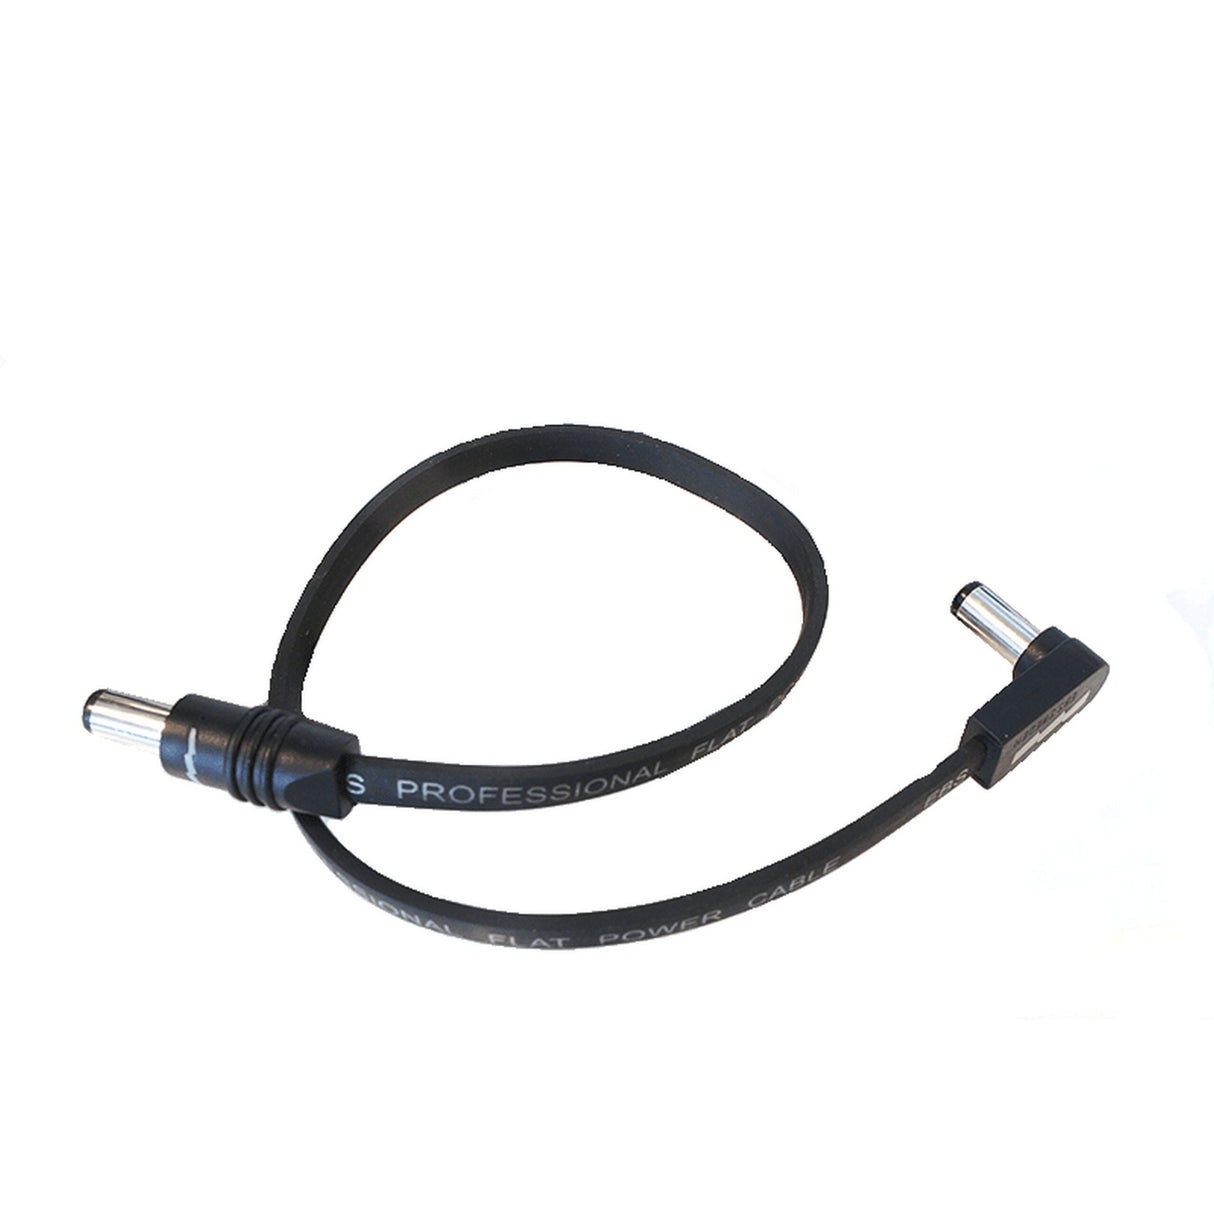 EBS DC1-28 90/0 Flat Power Cable, 28 Centimeters